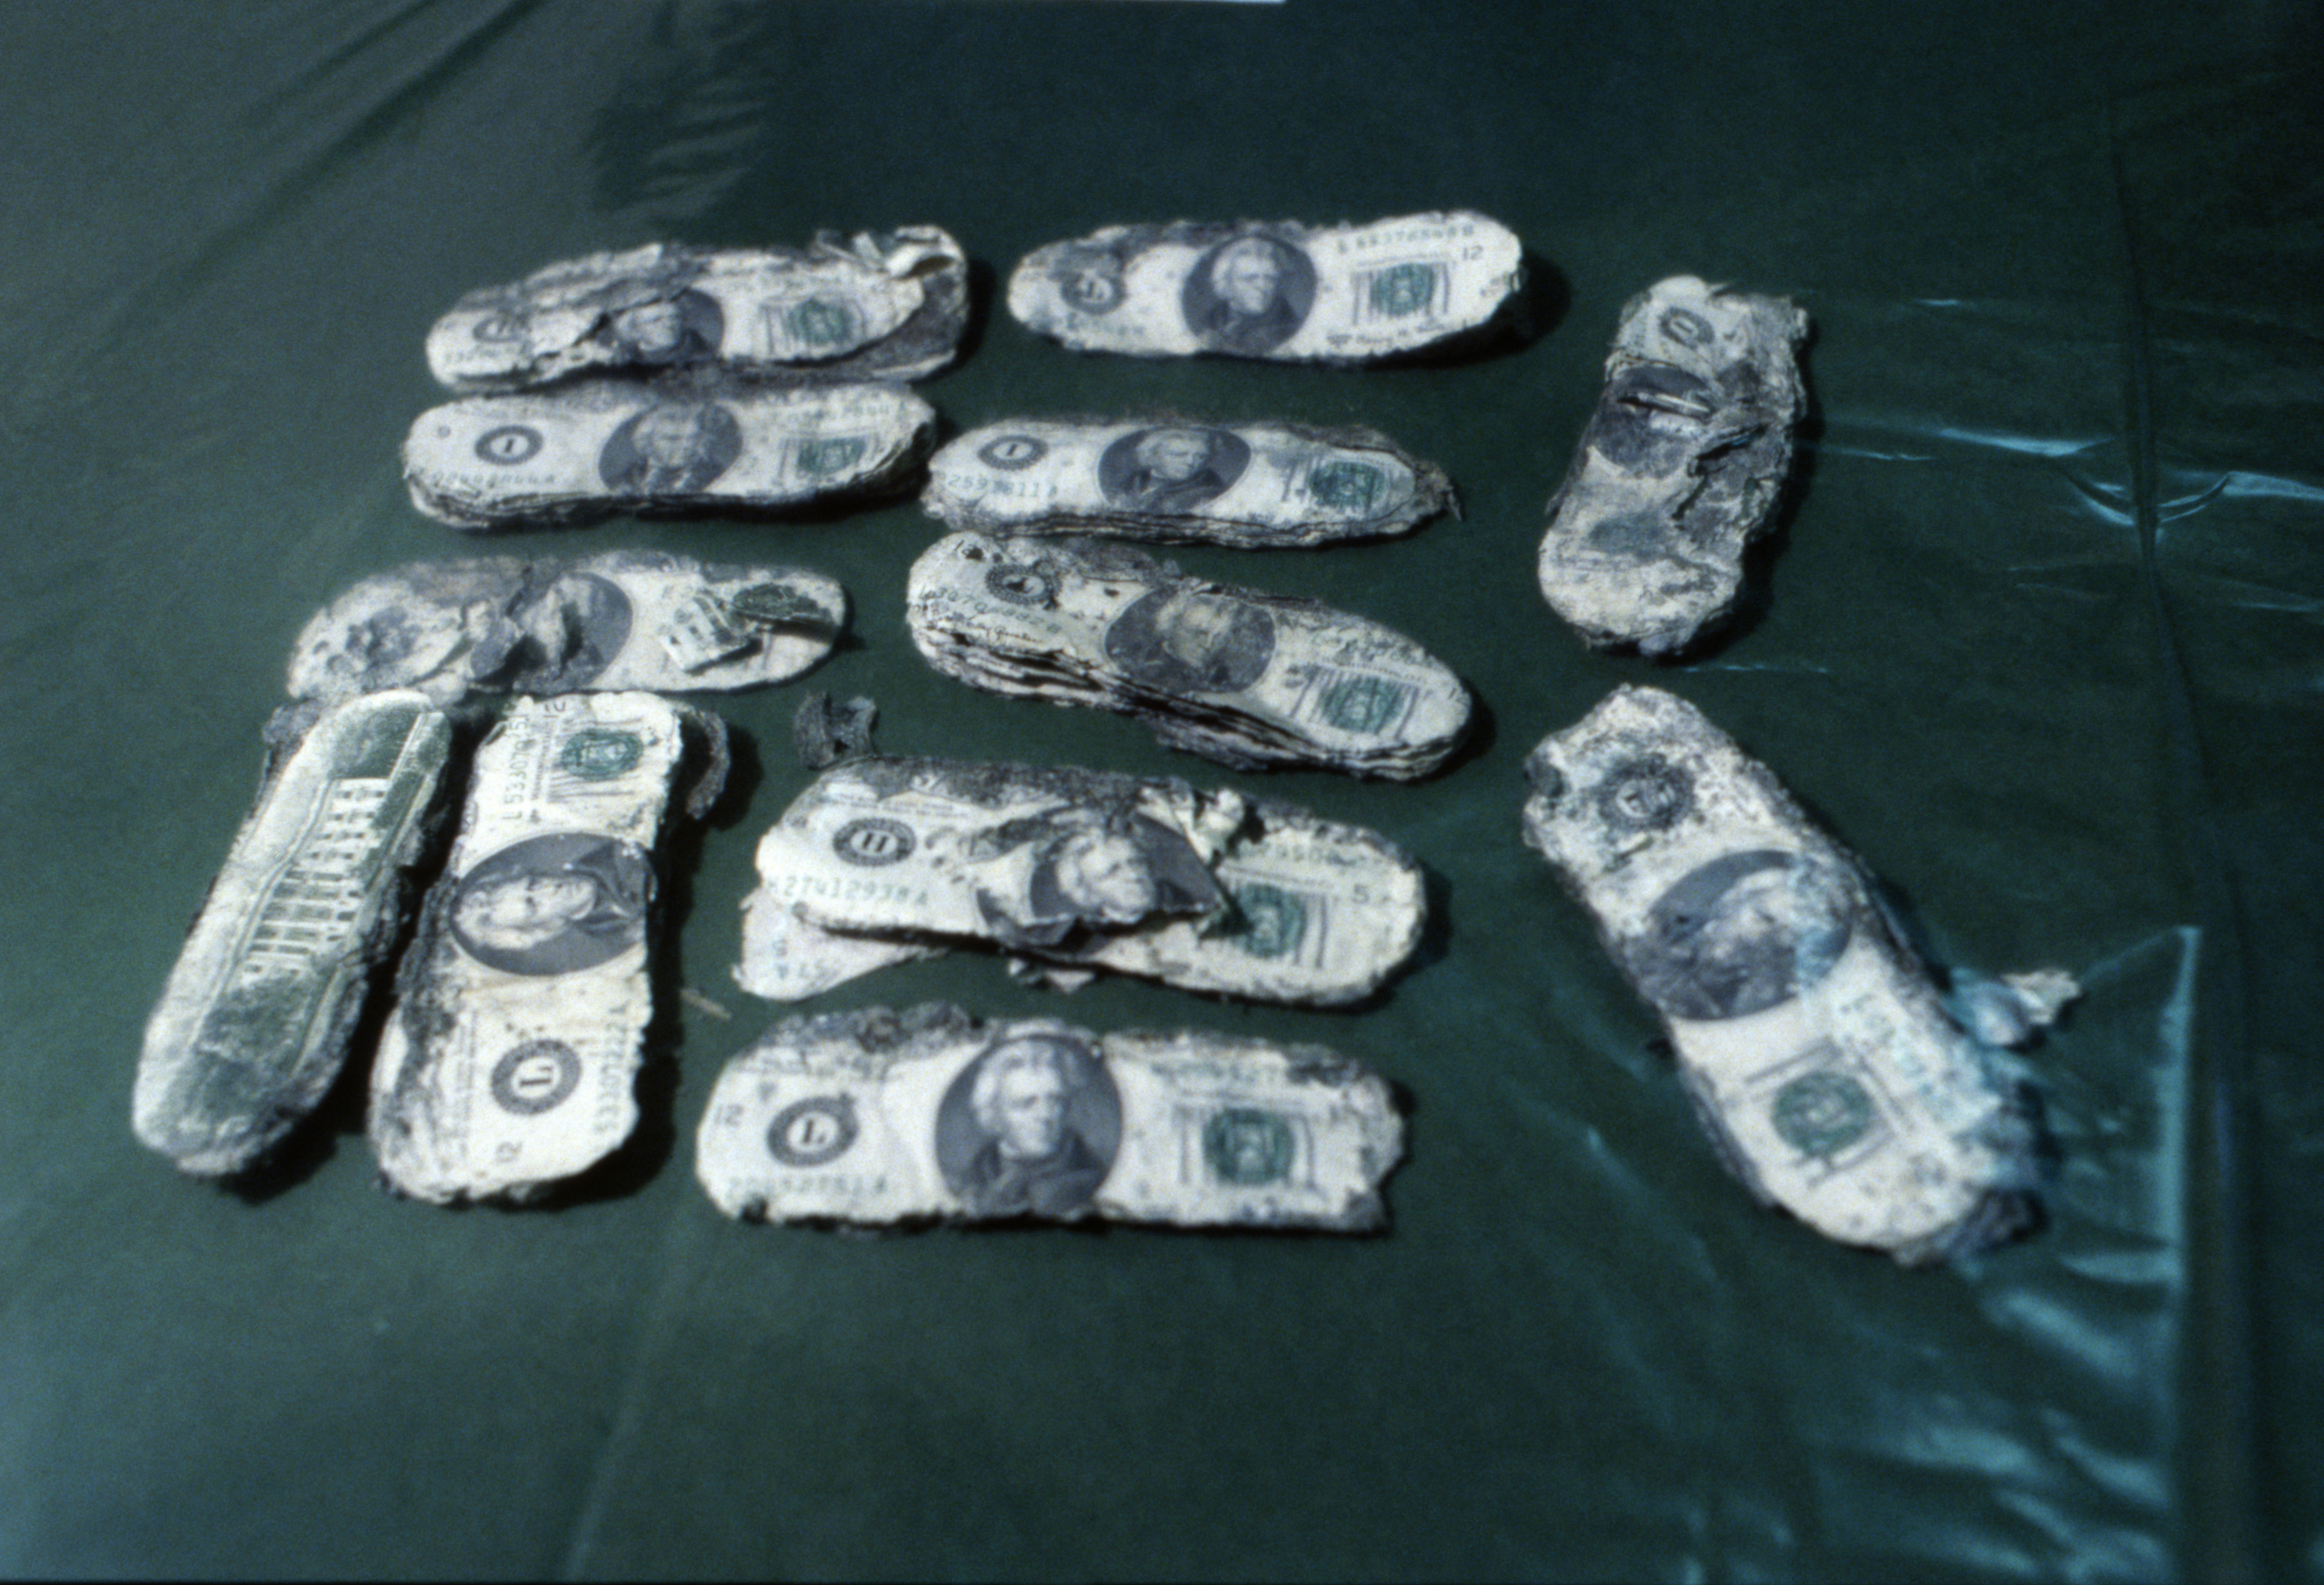 the badly decomposed ransom money they found in 1980